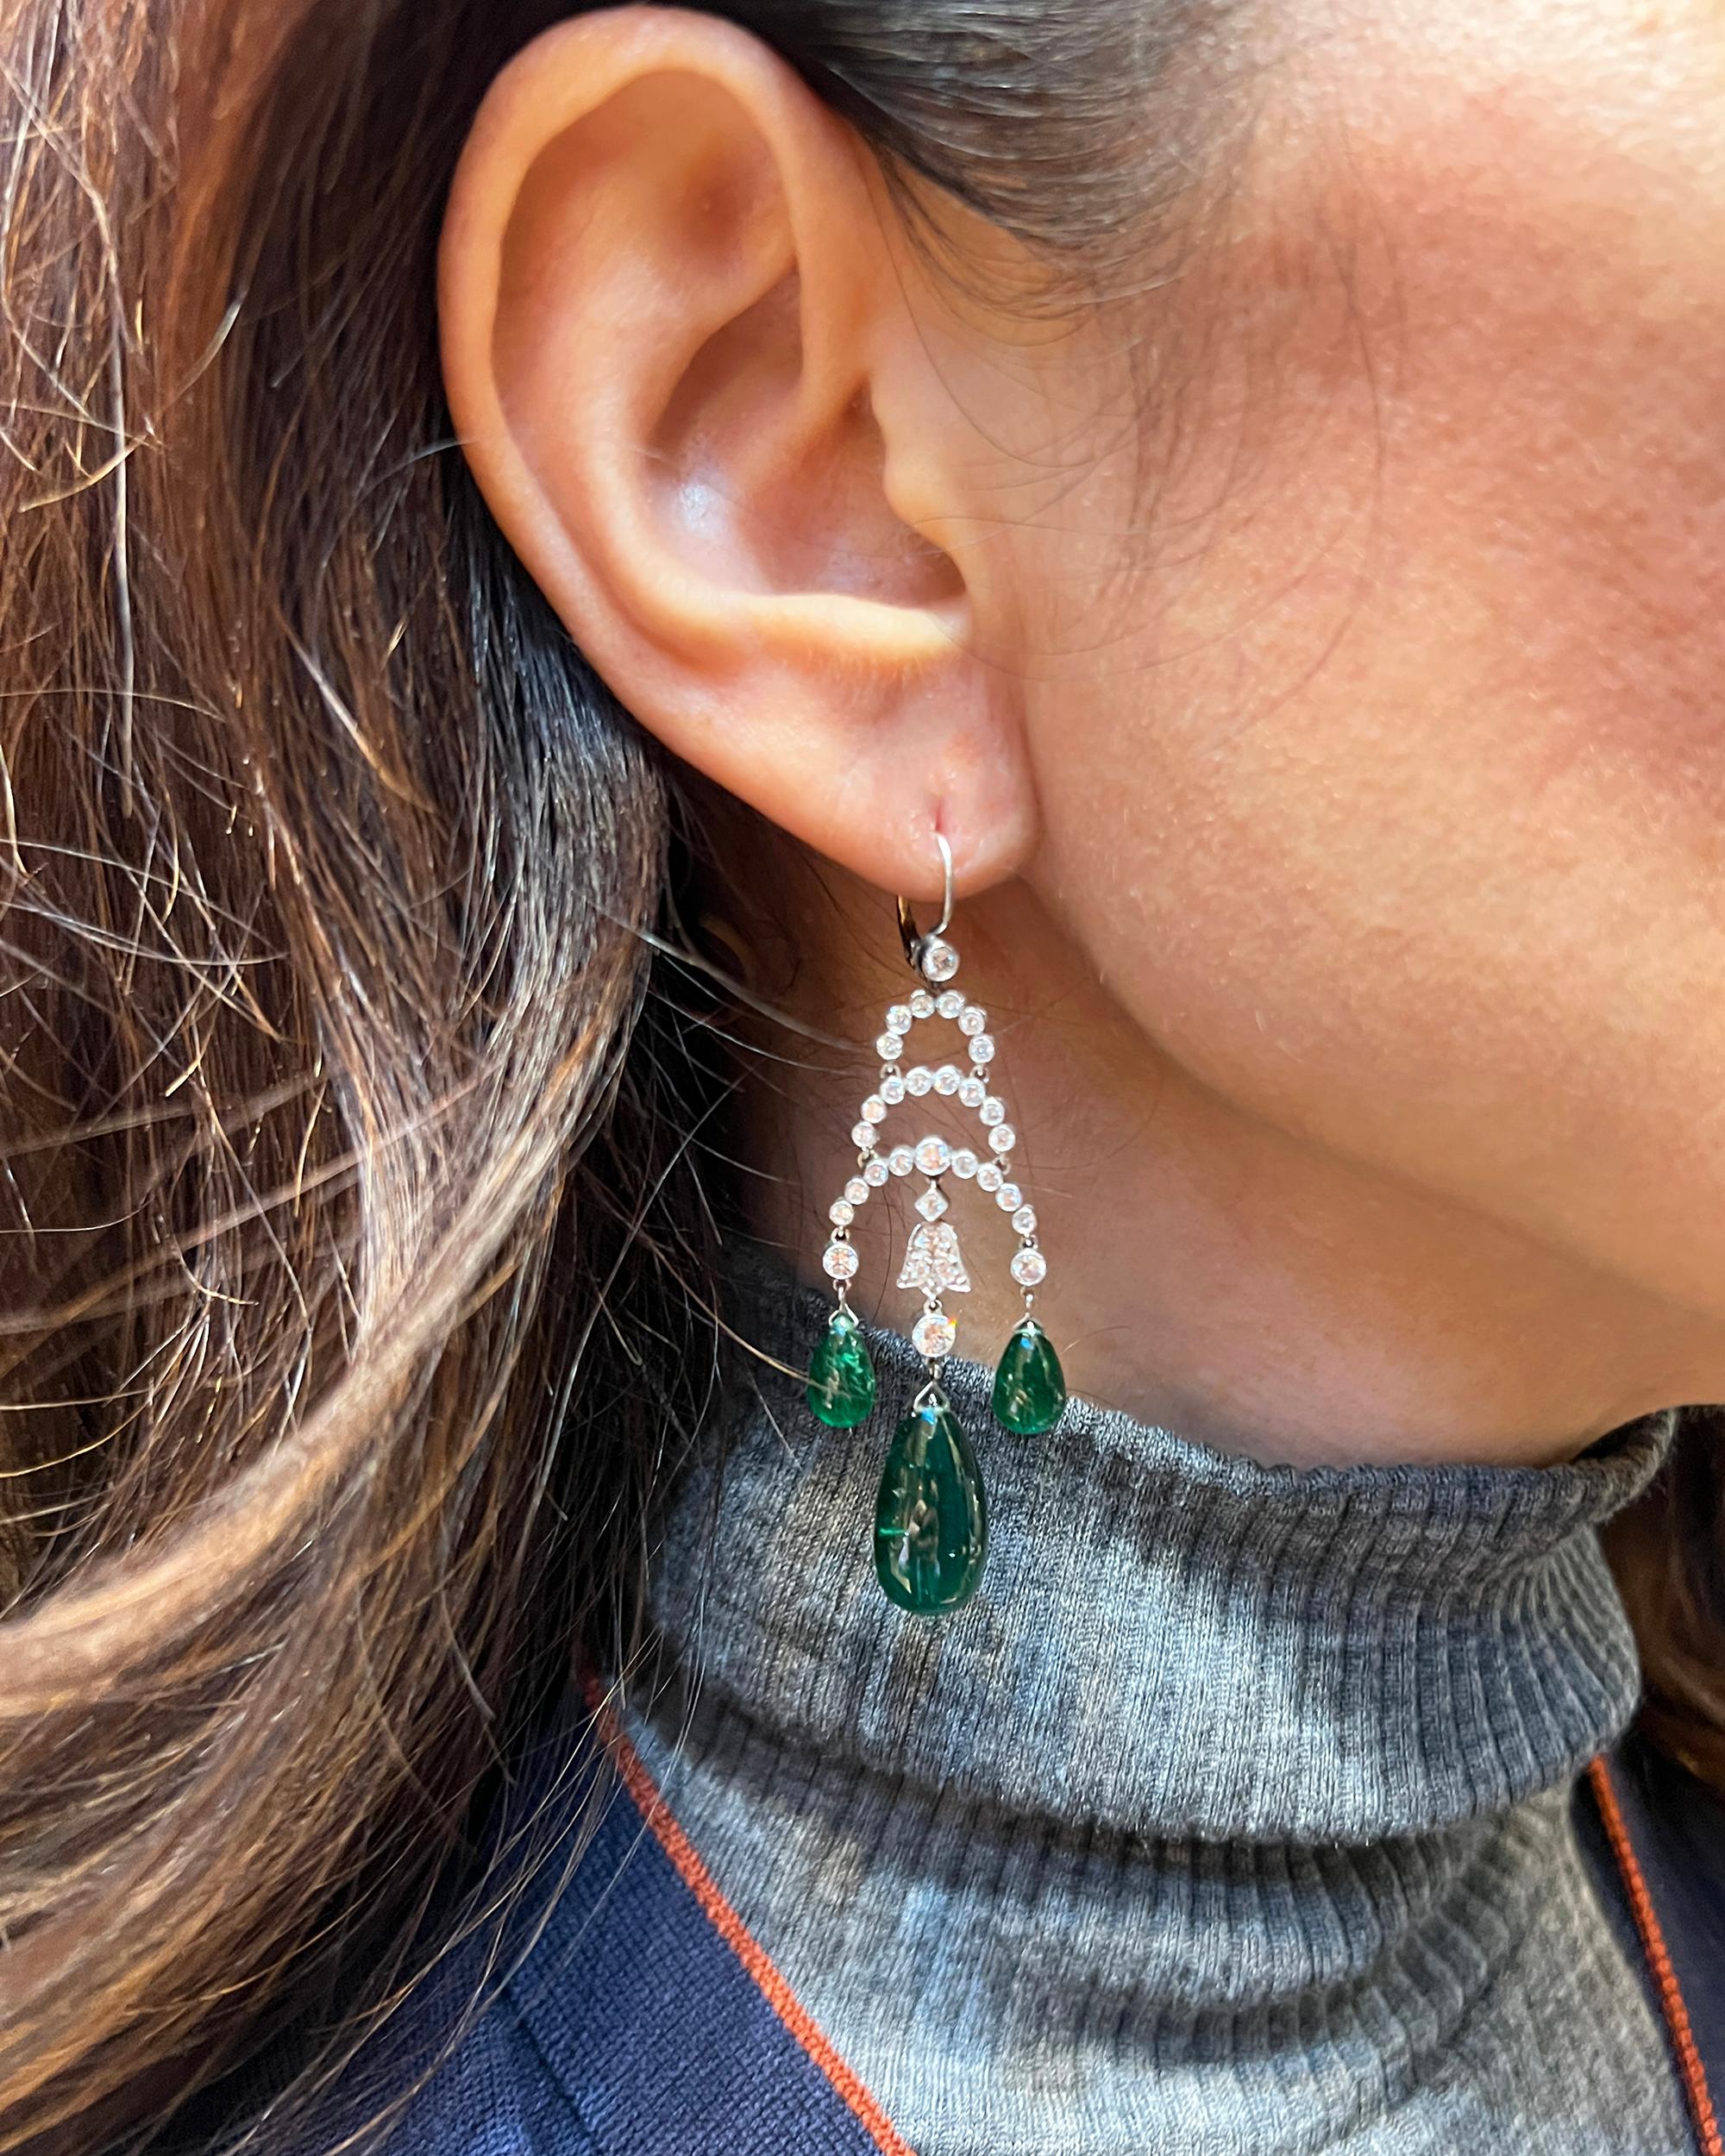 The charm of a chandelier earring - long, ornate, and dangling with multiple tiers - is undeniable. Designed to accentuate the length of your neck, chandelier earrings are statement pieces that can be traced back to ancient cultures. The chandelier